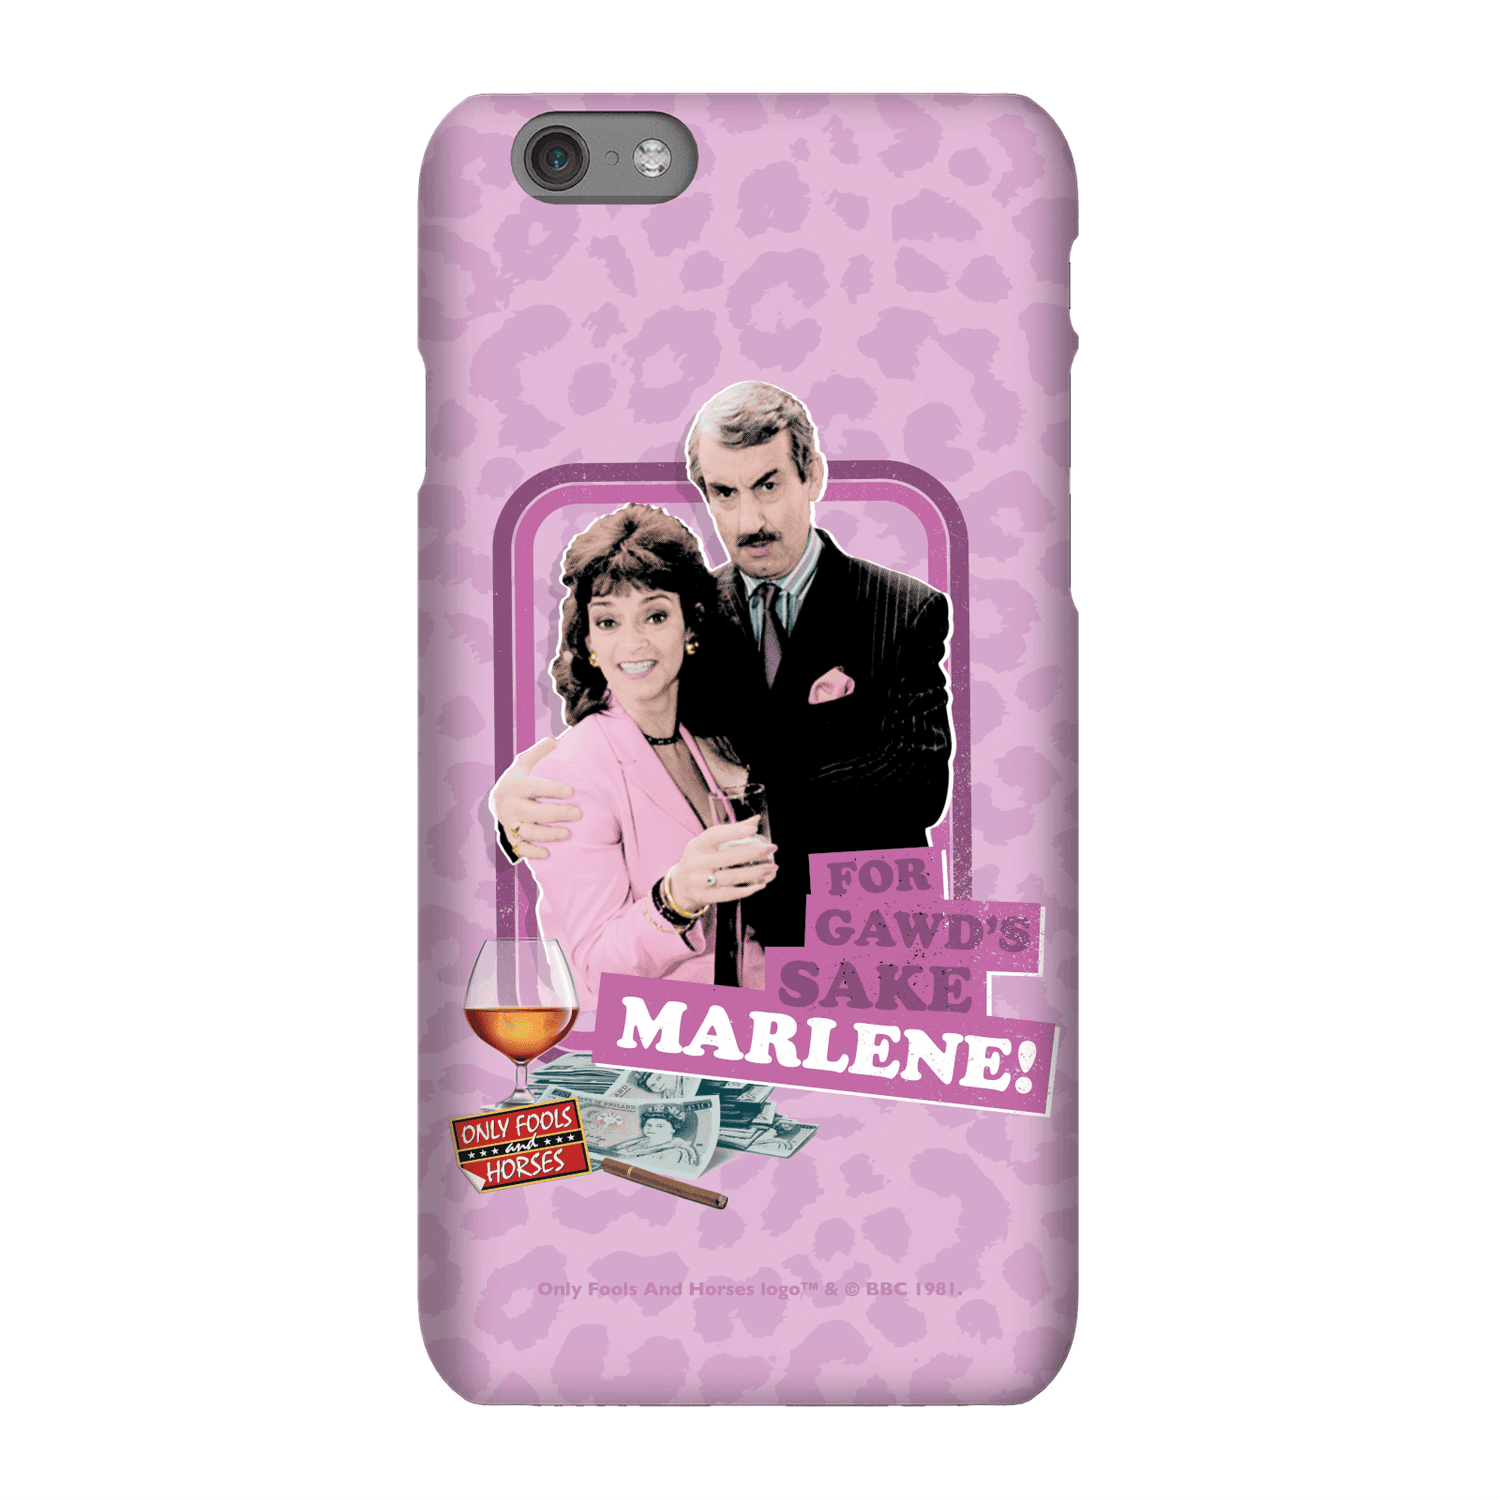 Only Fools And Horses For Gawd's Sake Marlene! Phone Case for iPhone and Android